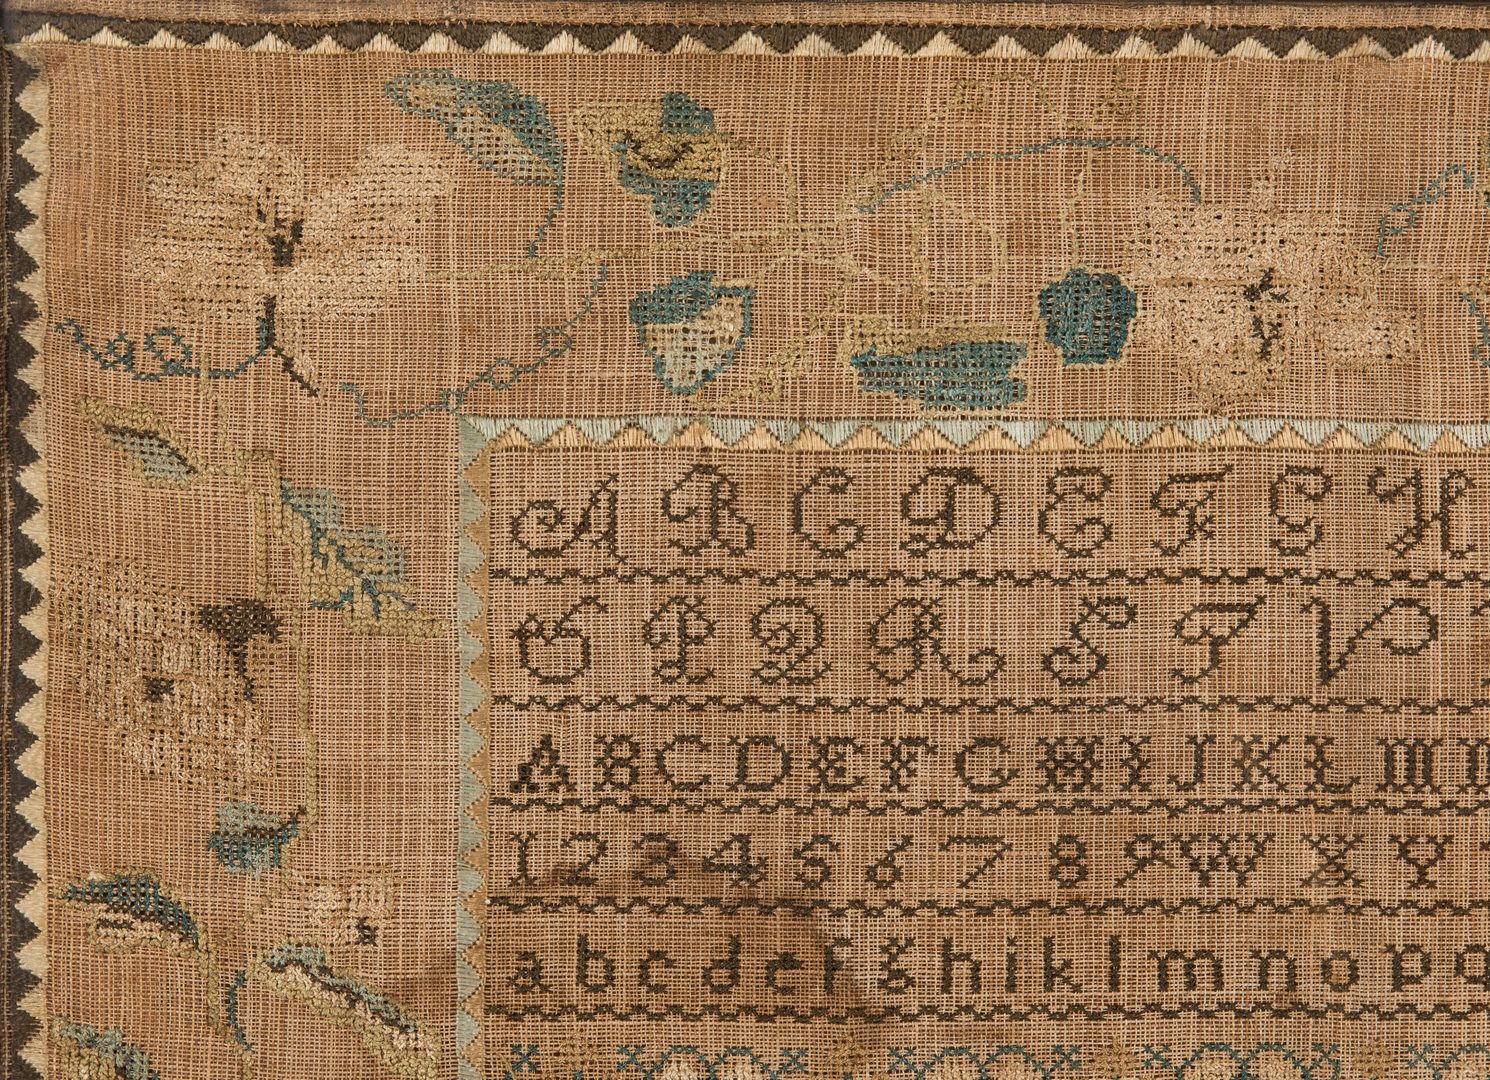 Lot 591: Tennessee Sampler, Henley Family, Knox County